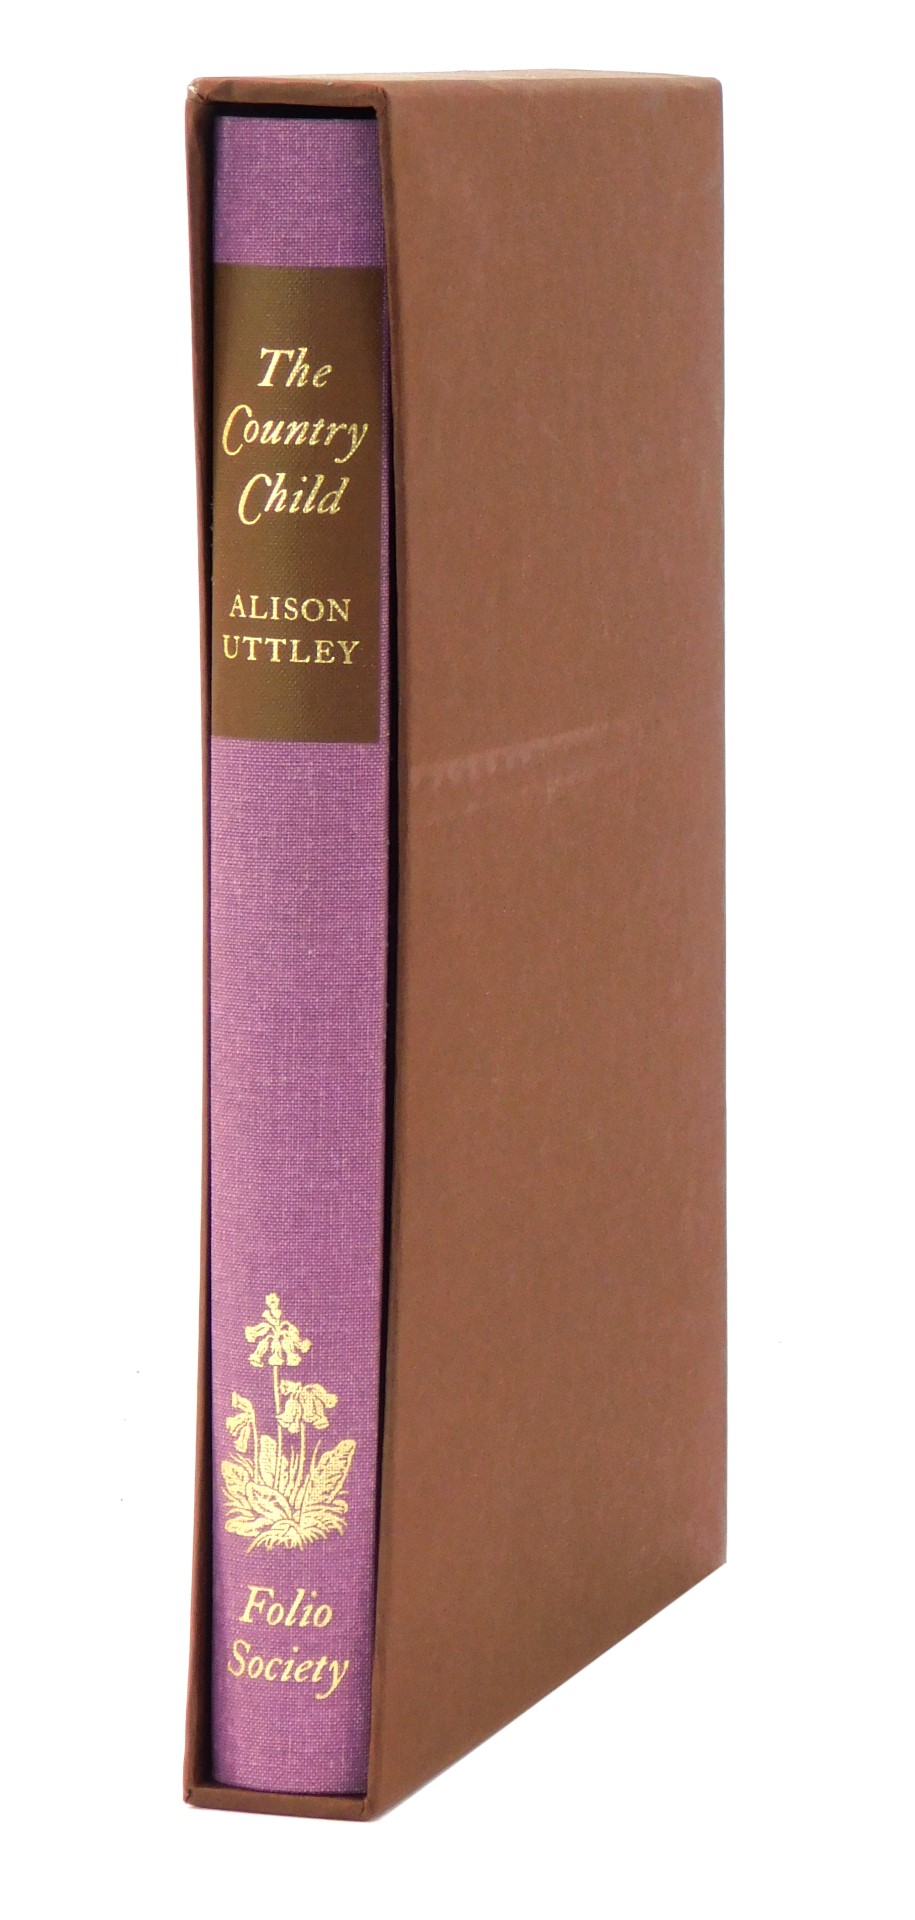 Uttley (Alison). The Country Child, 1 volume in slip case published by The Folio Society.